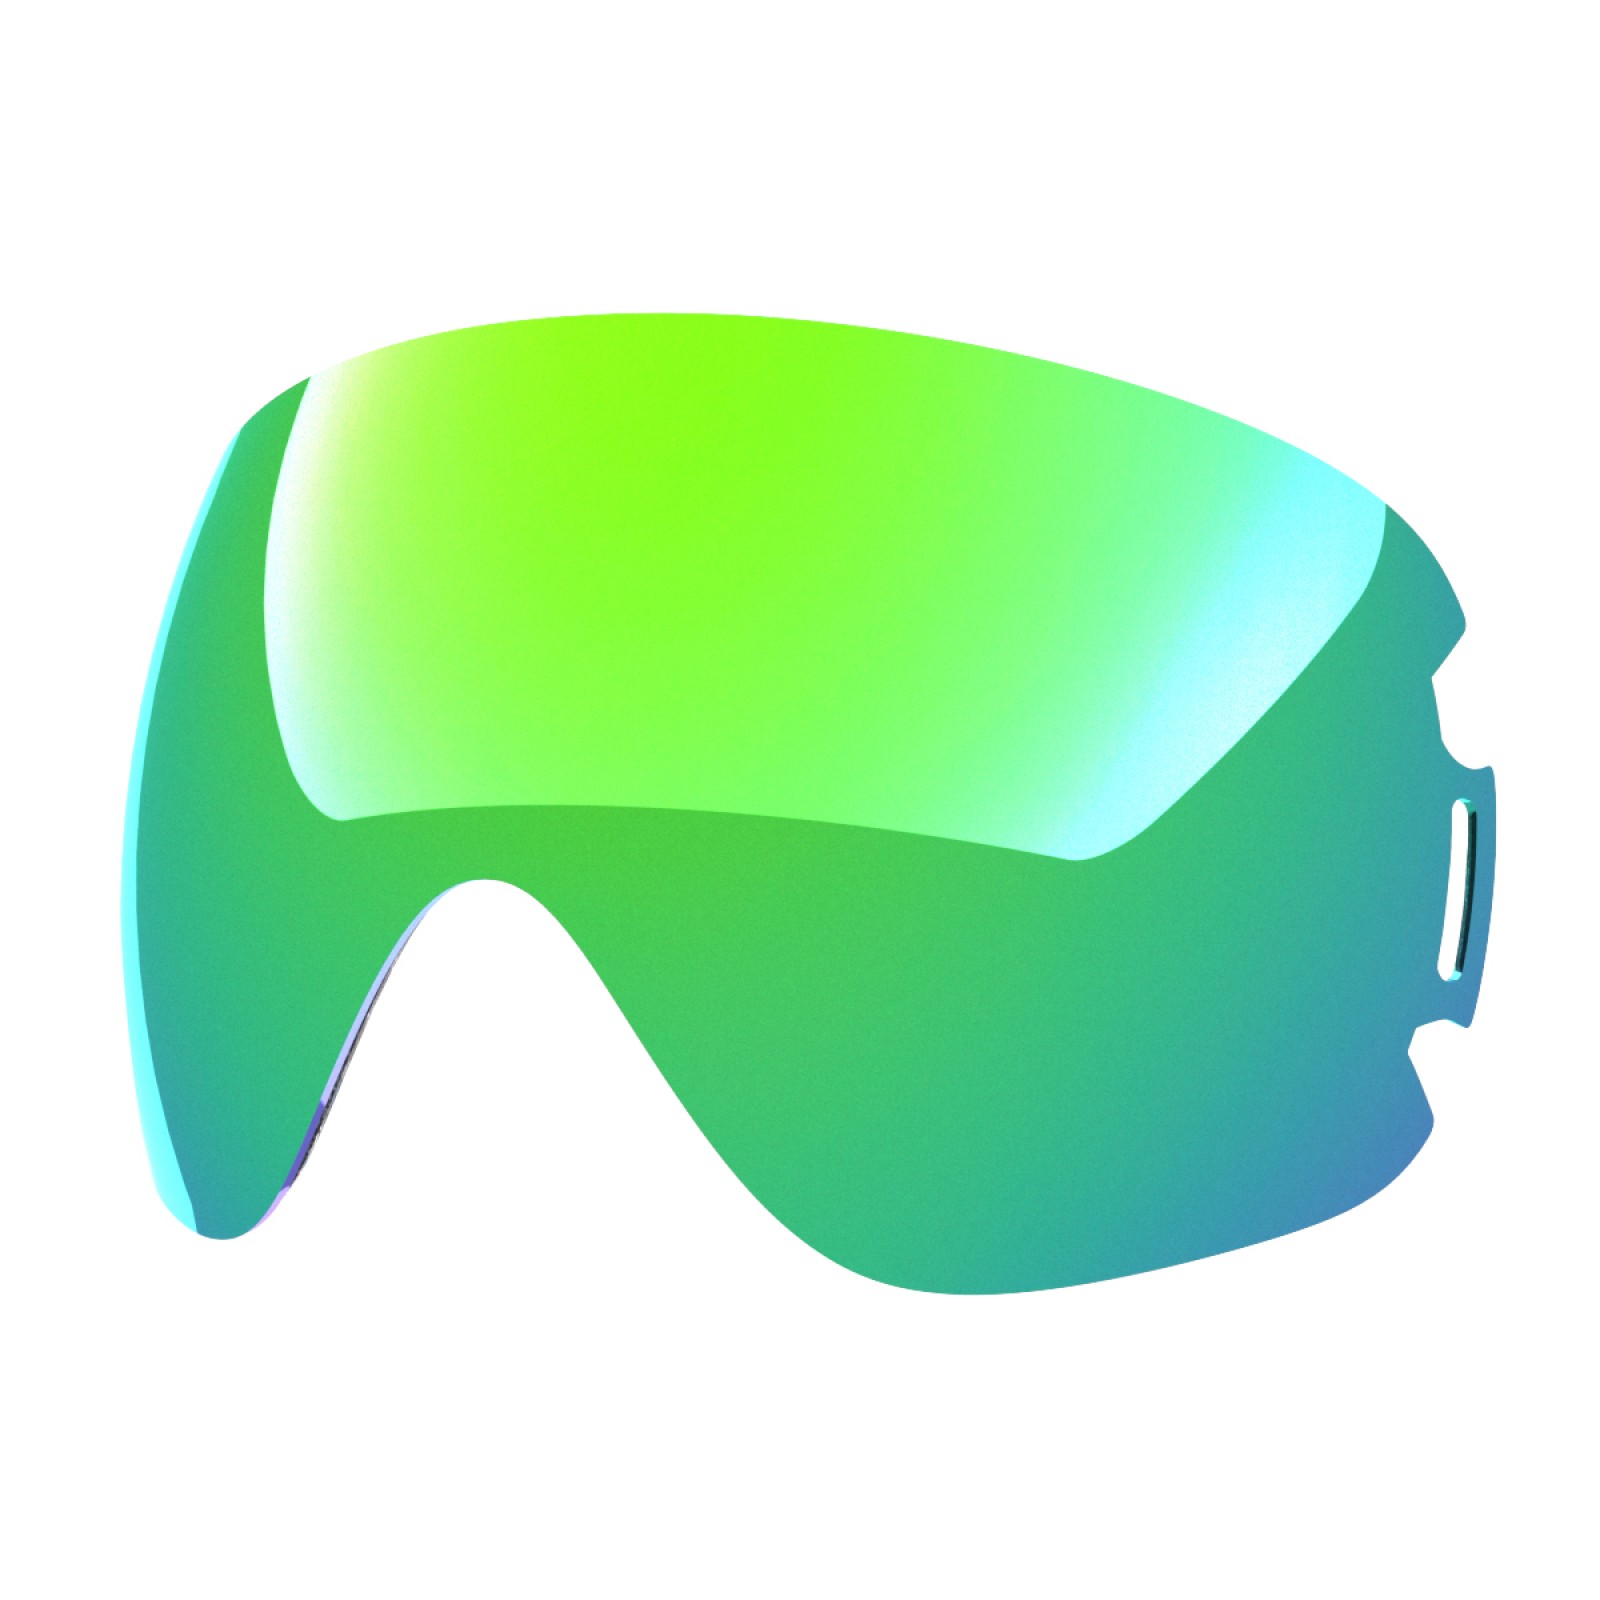 Green MCI lens for Open goggle